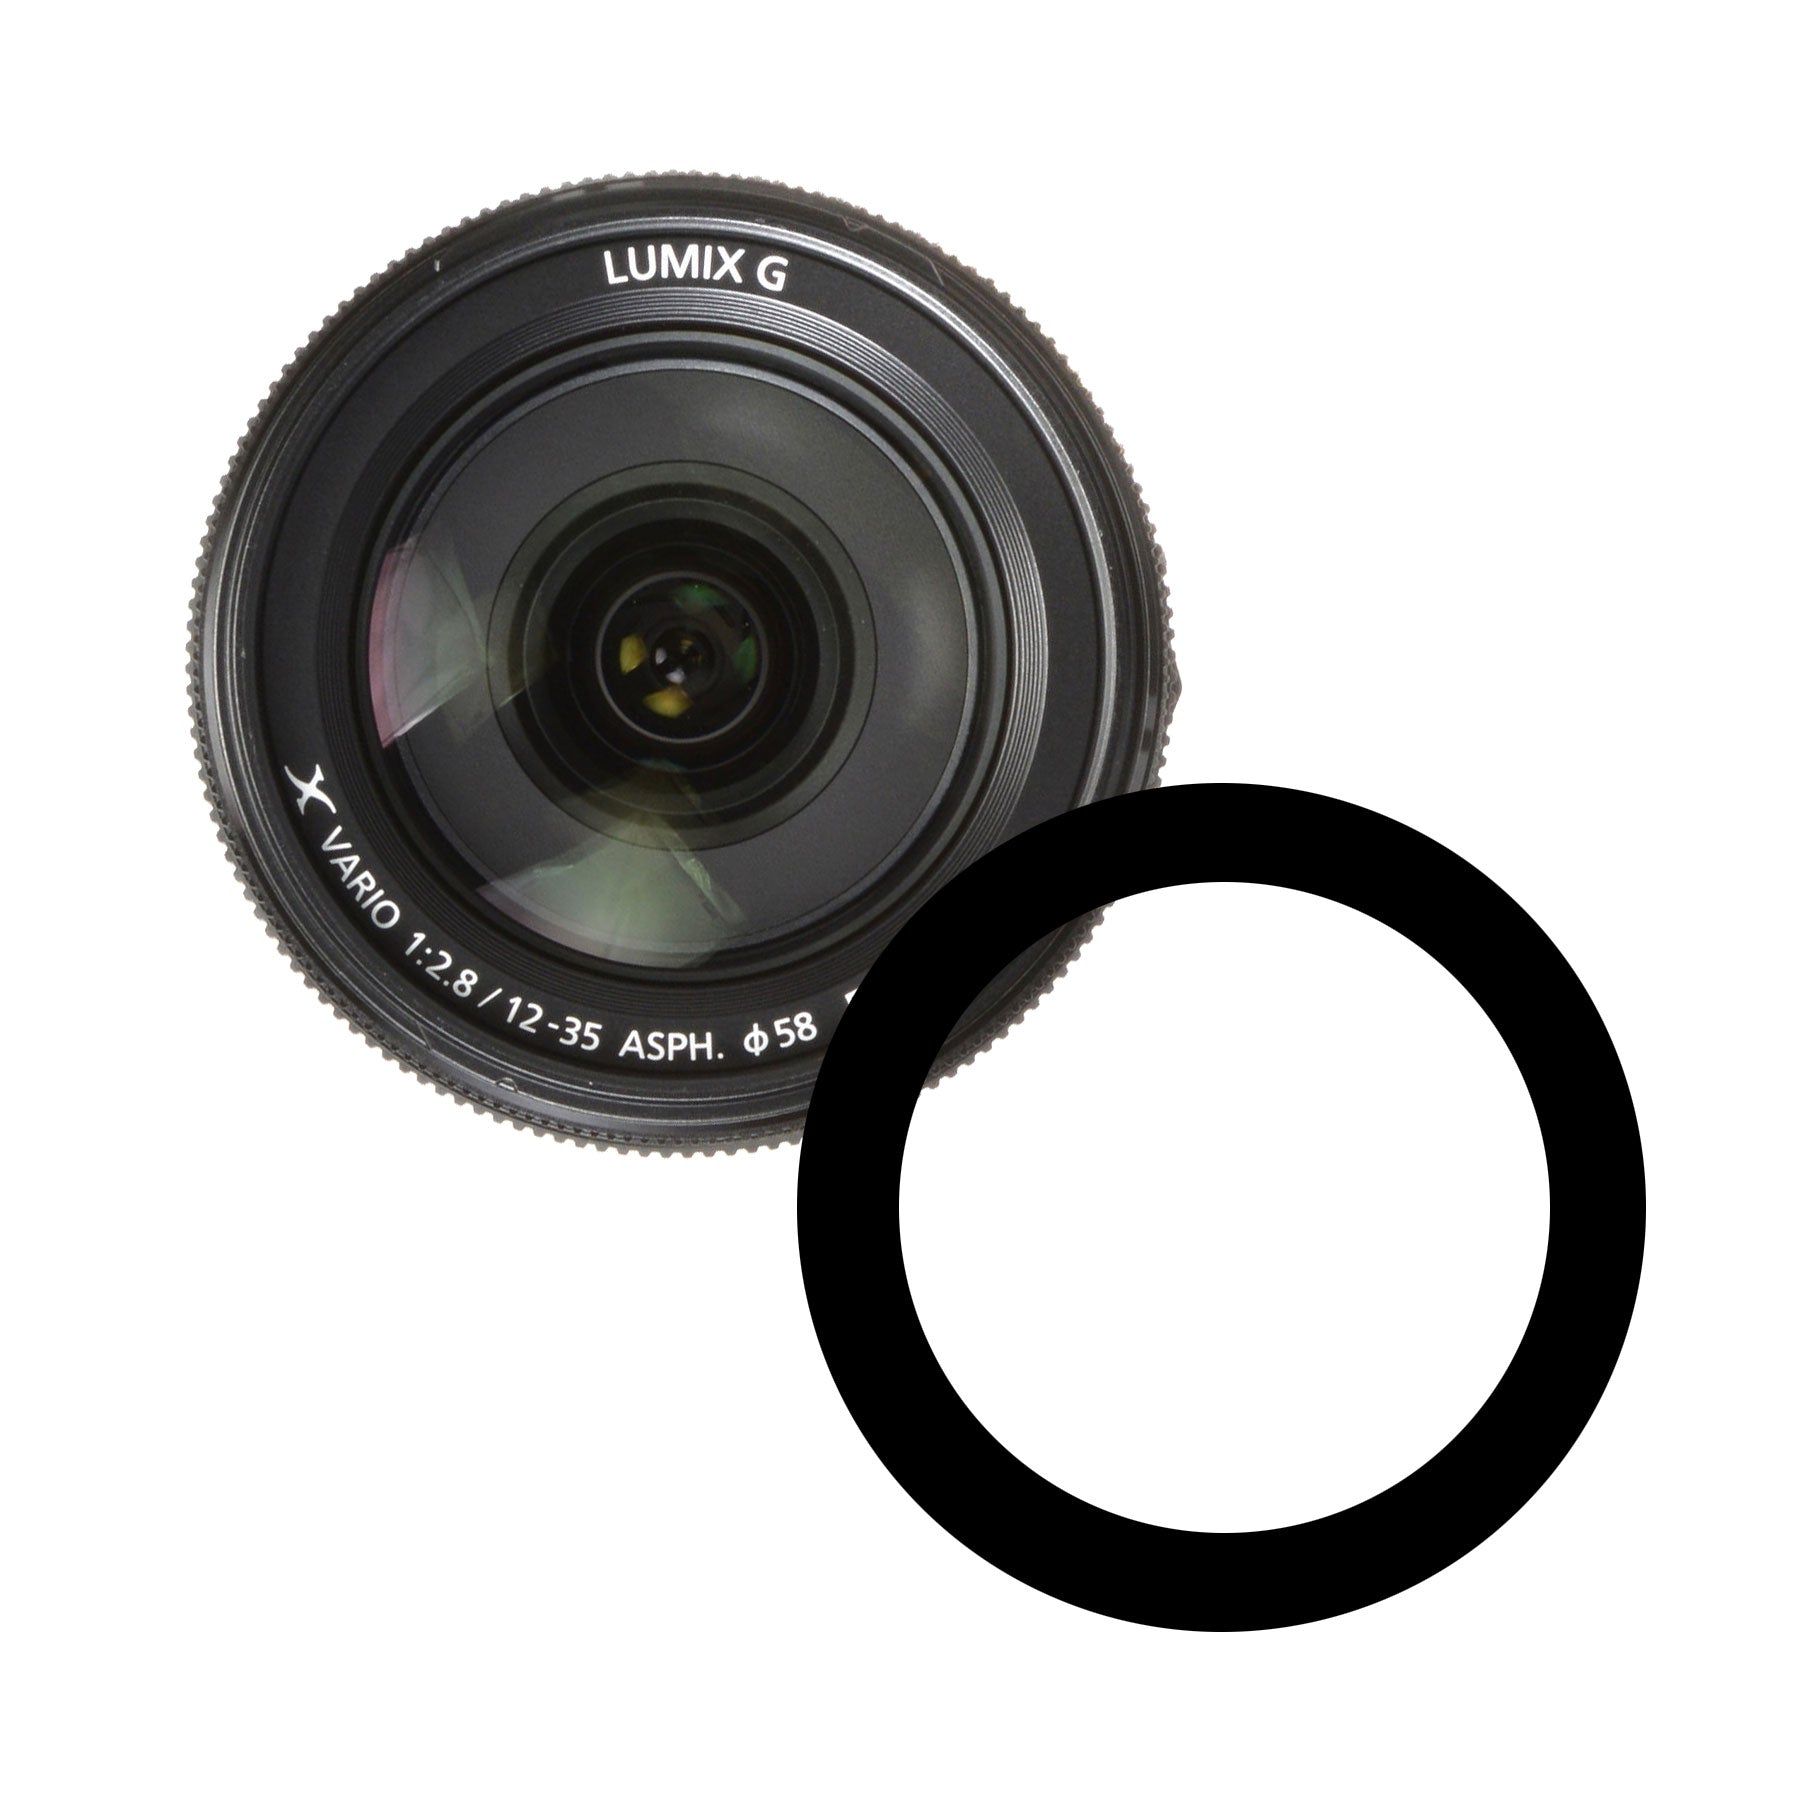 Vriend Afstoting betreden Anti-Reflection Ring for Panasonic 12-35mm F2.8 I or II ASPH Power OIS